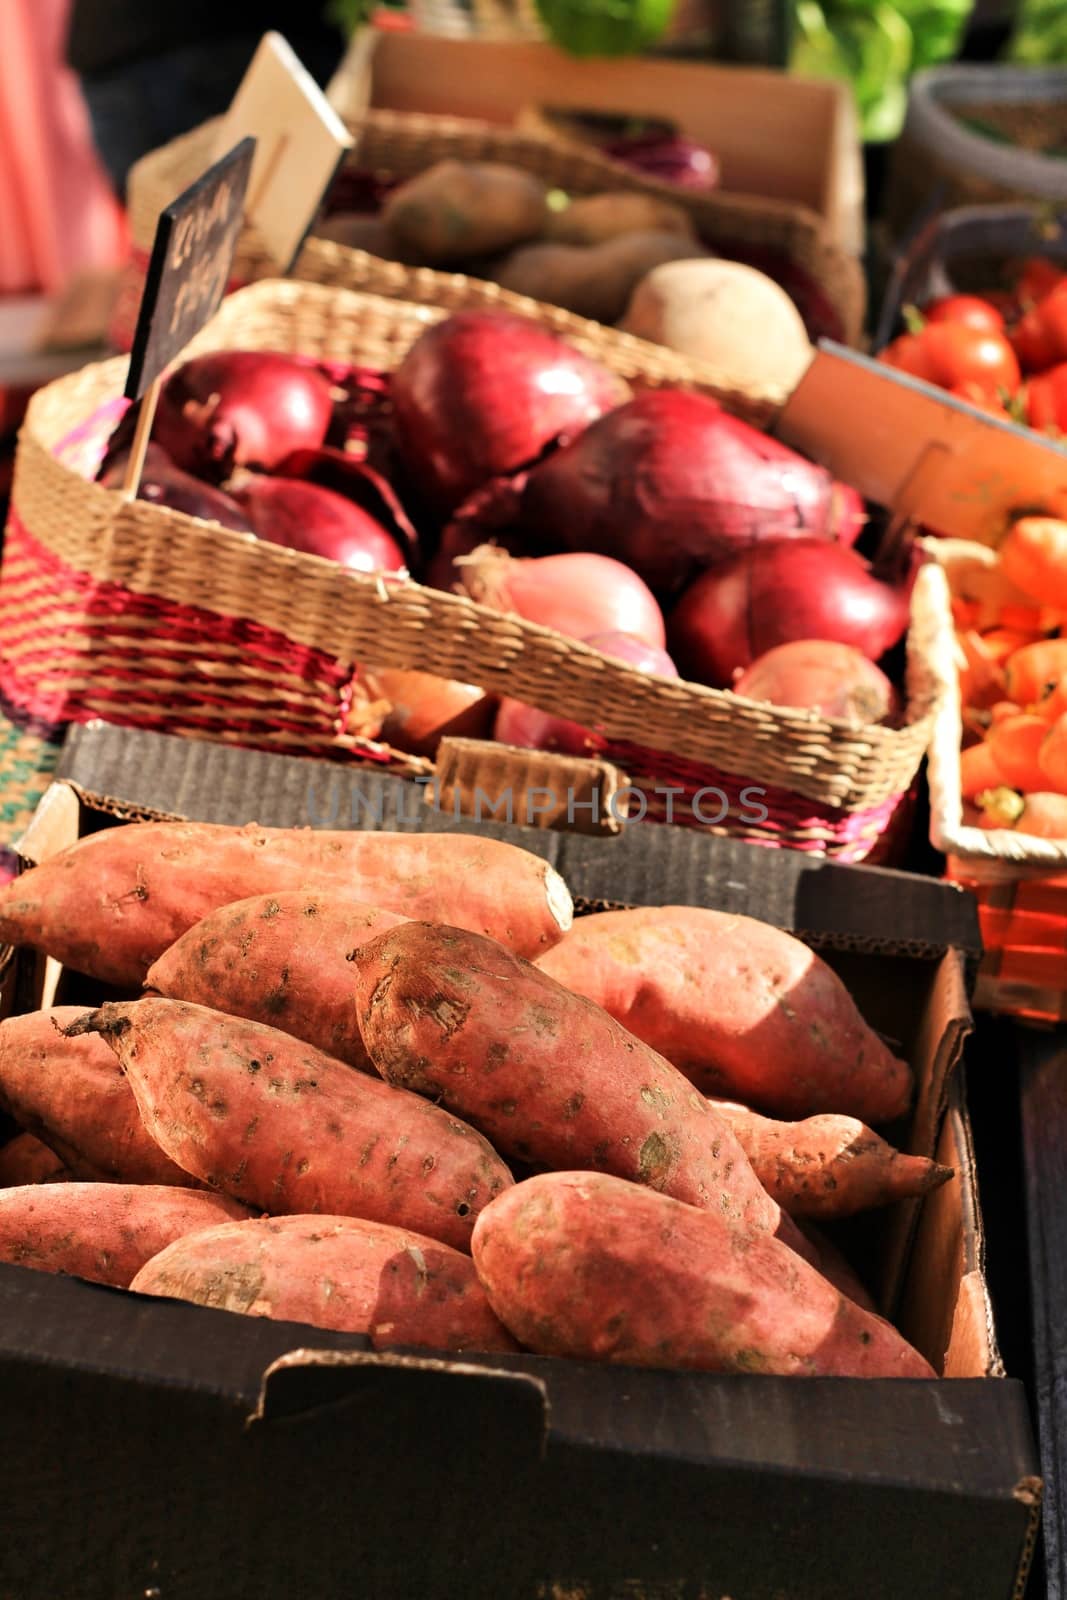 Vegetables for sale at a ecological market stall in Elche, Alicante, Spain.